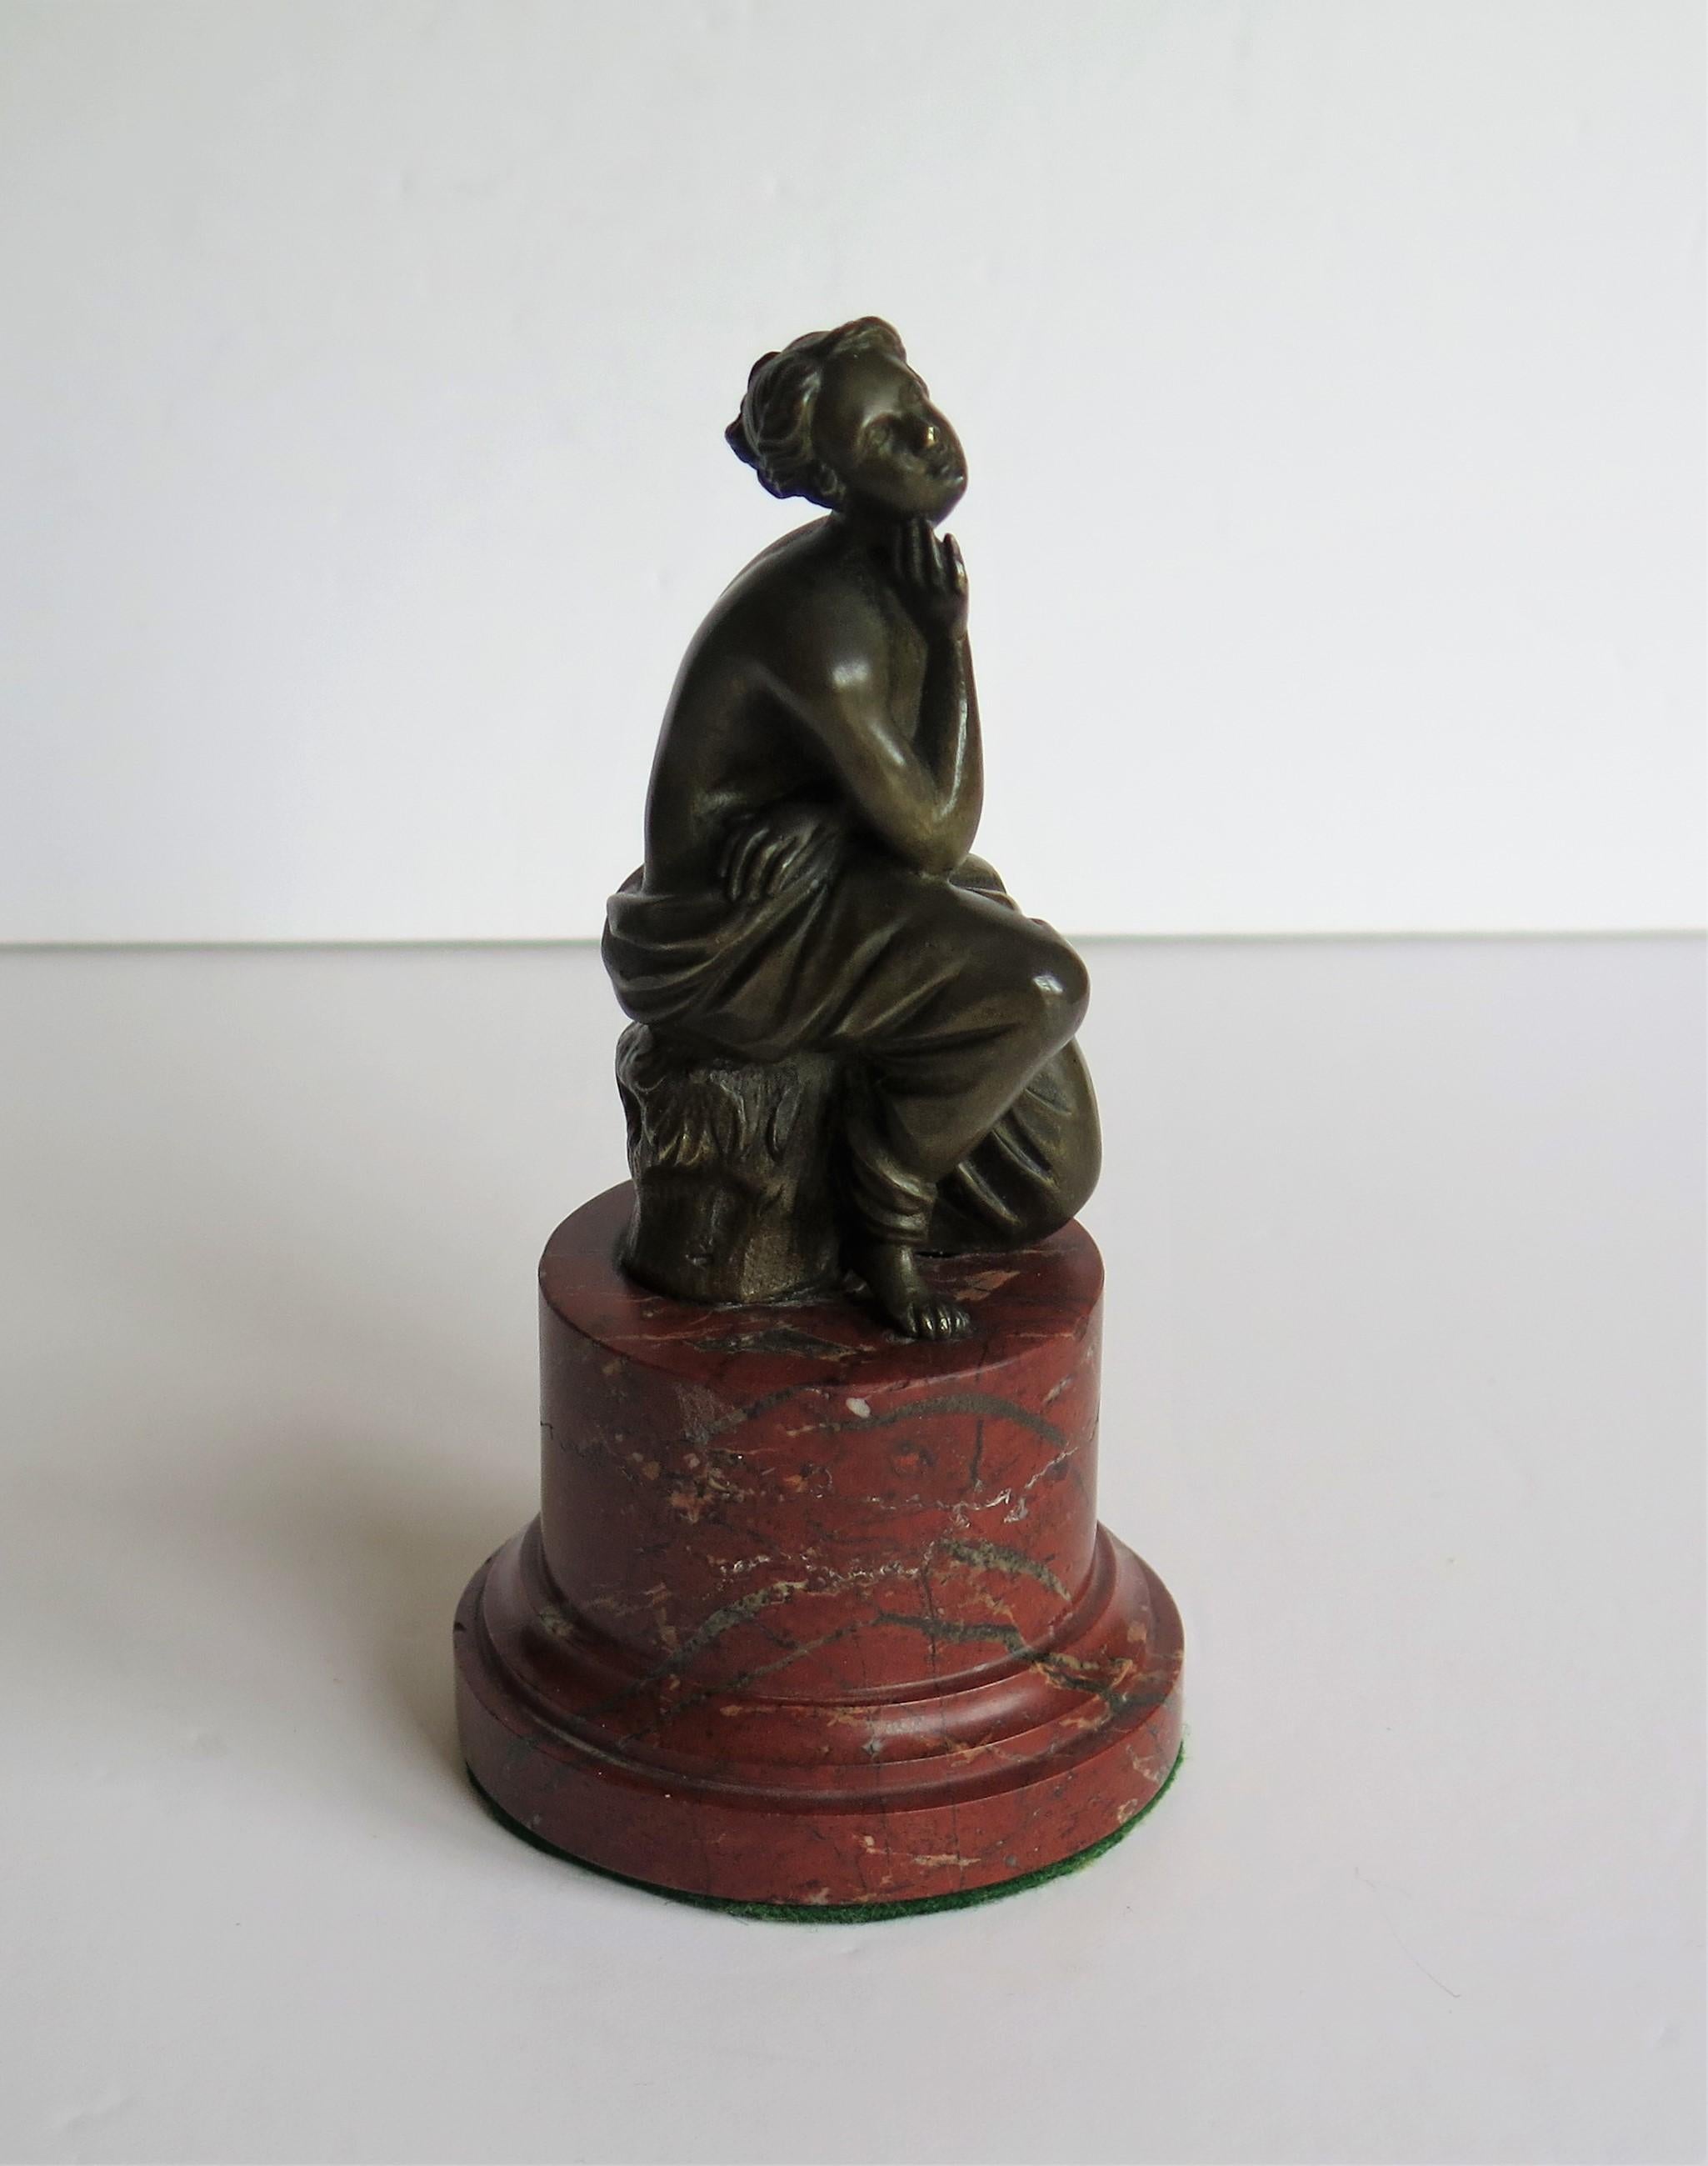 19th Century 19thC. Art Nouveau Bronze Sculpture of Lady on Red Marble Base, Probably French